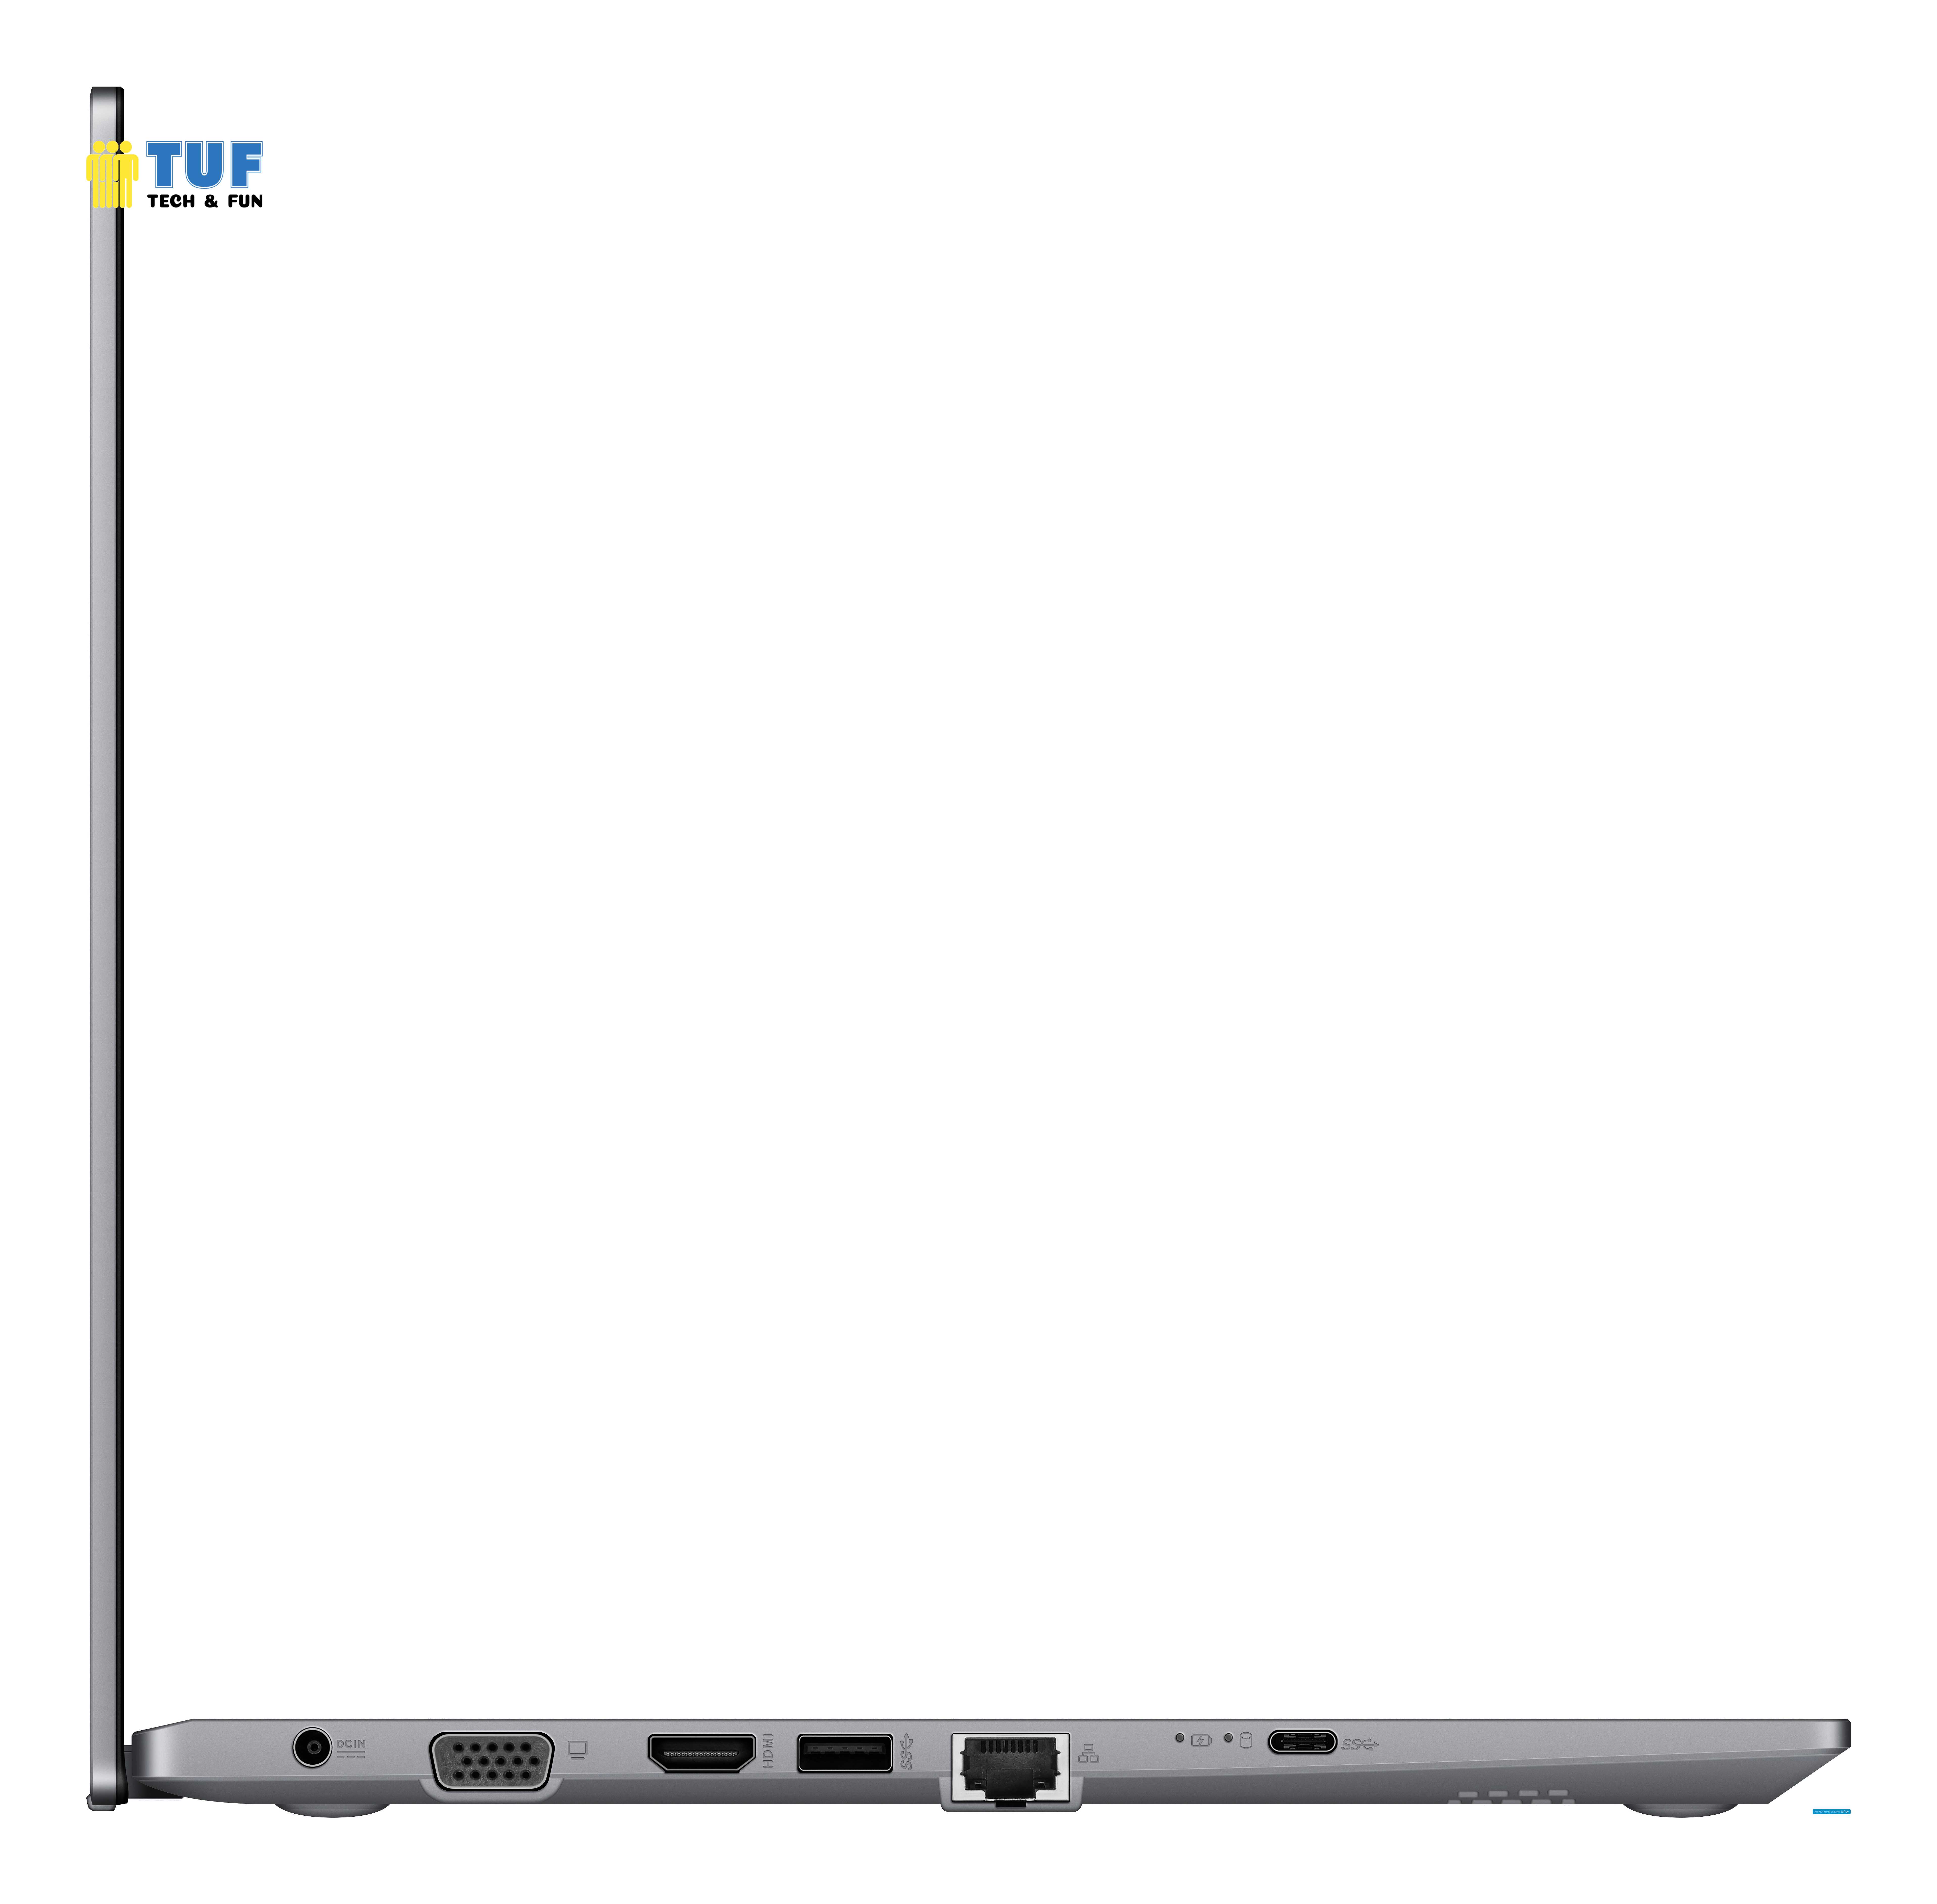 Ноутбук ASUS ASUSPro P3540FA-BR1383T